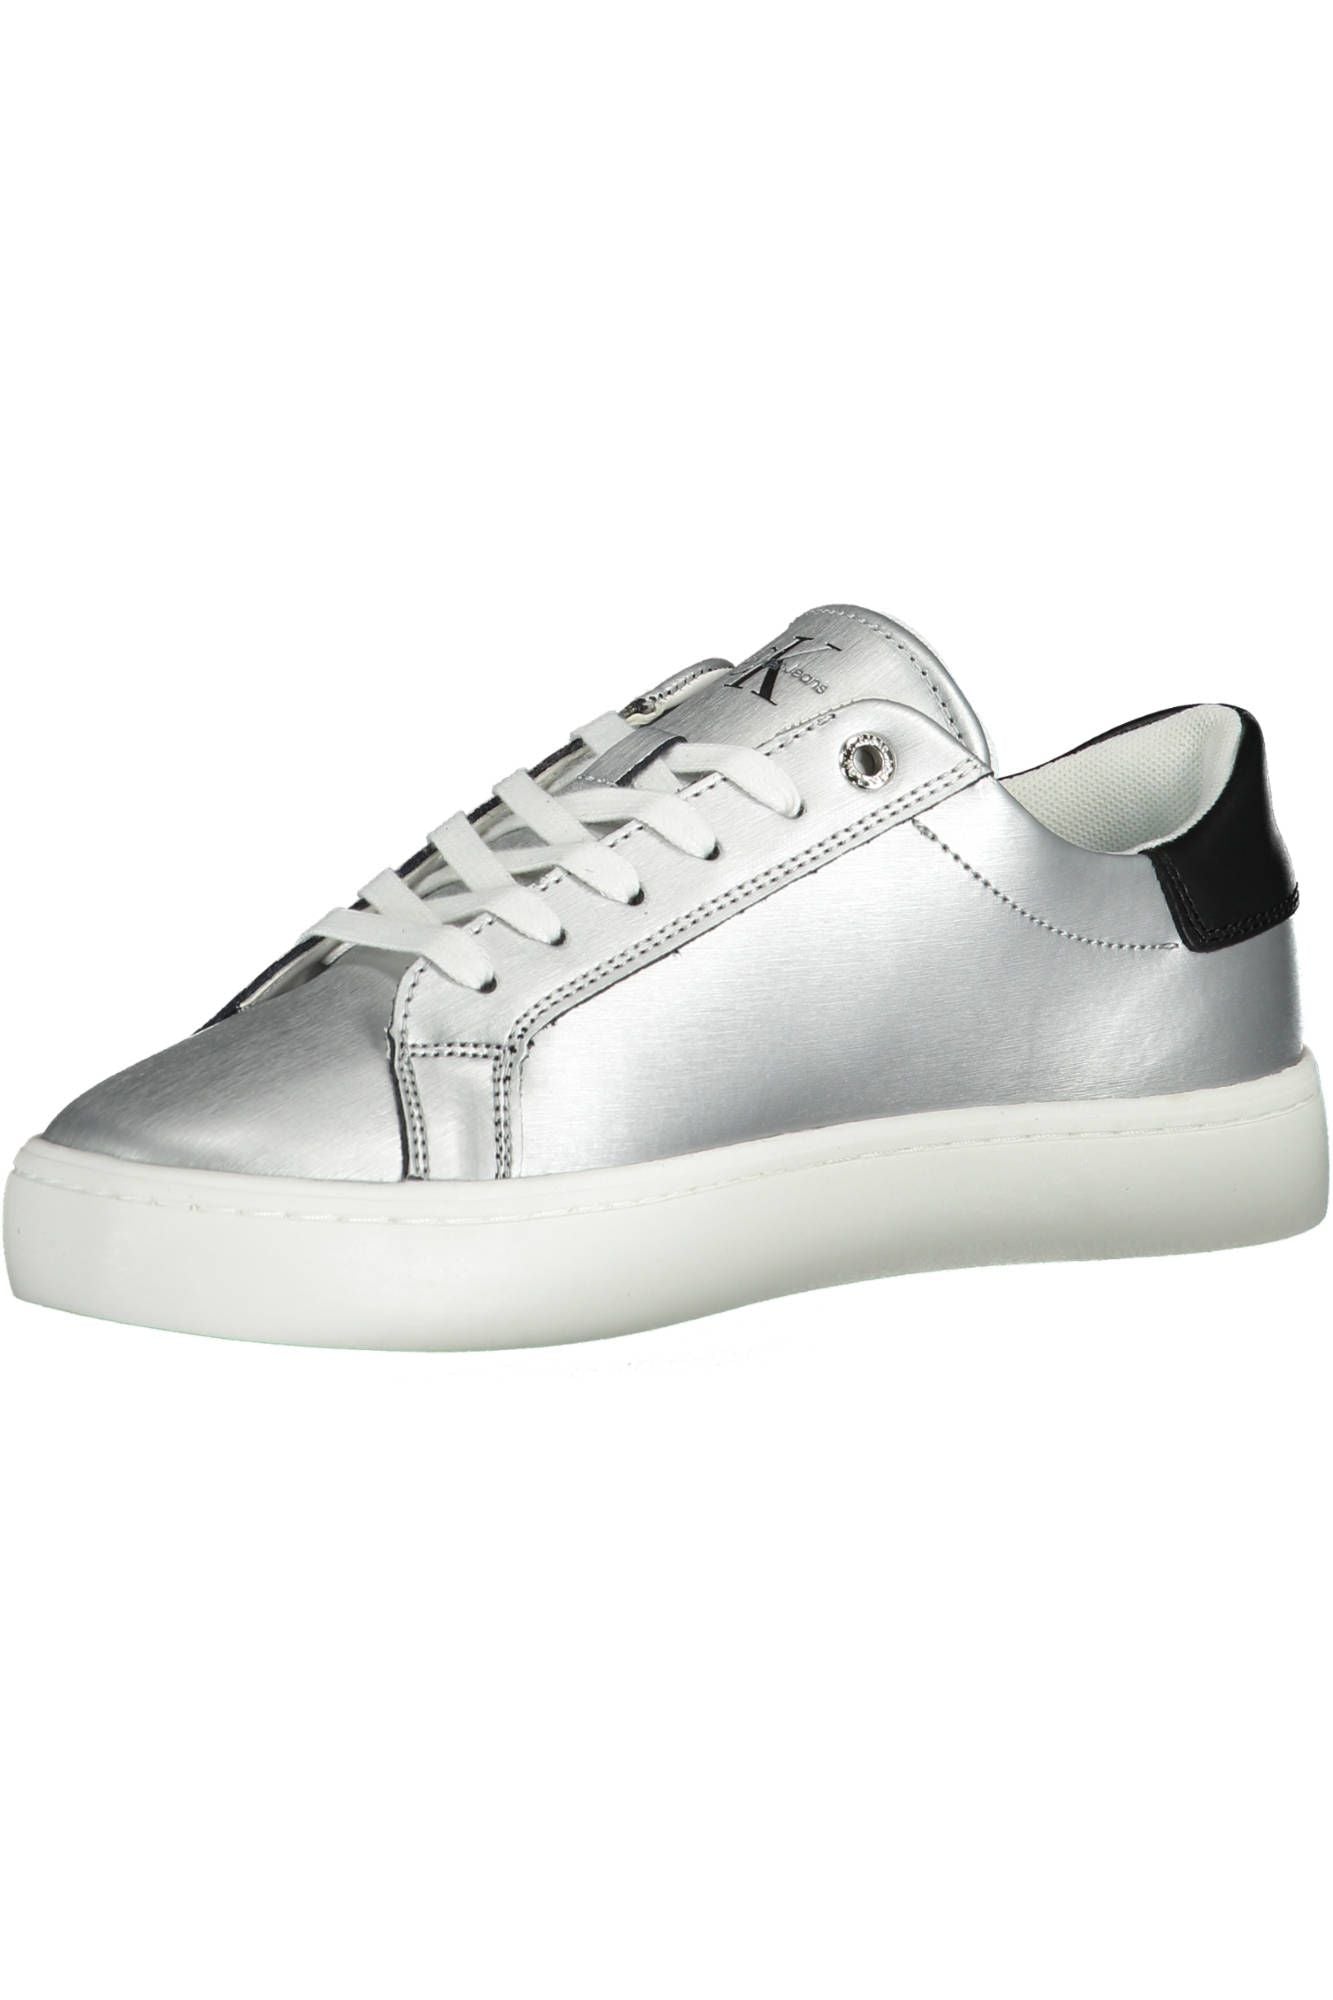 Elegant Silver Laced Sneakers with Contrasting Sole